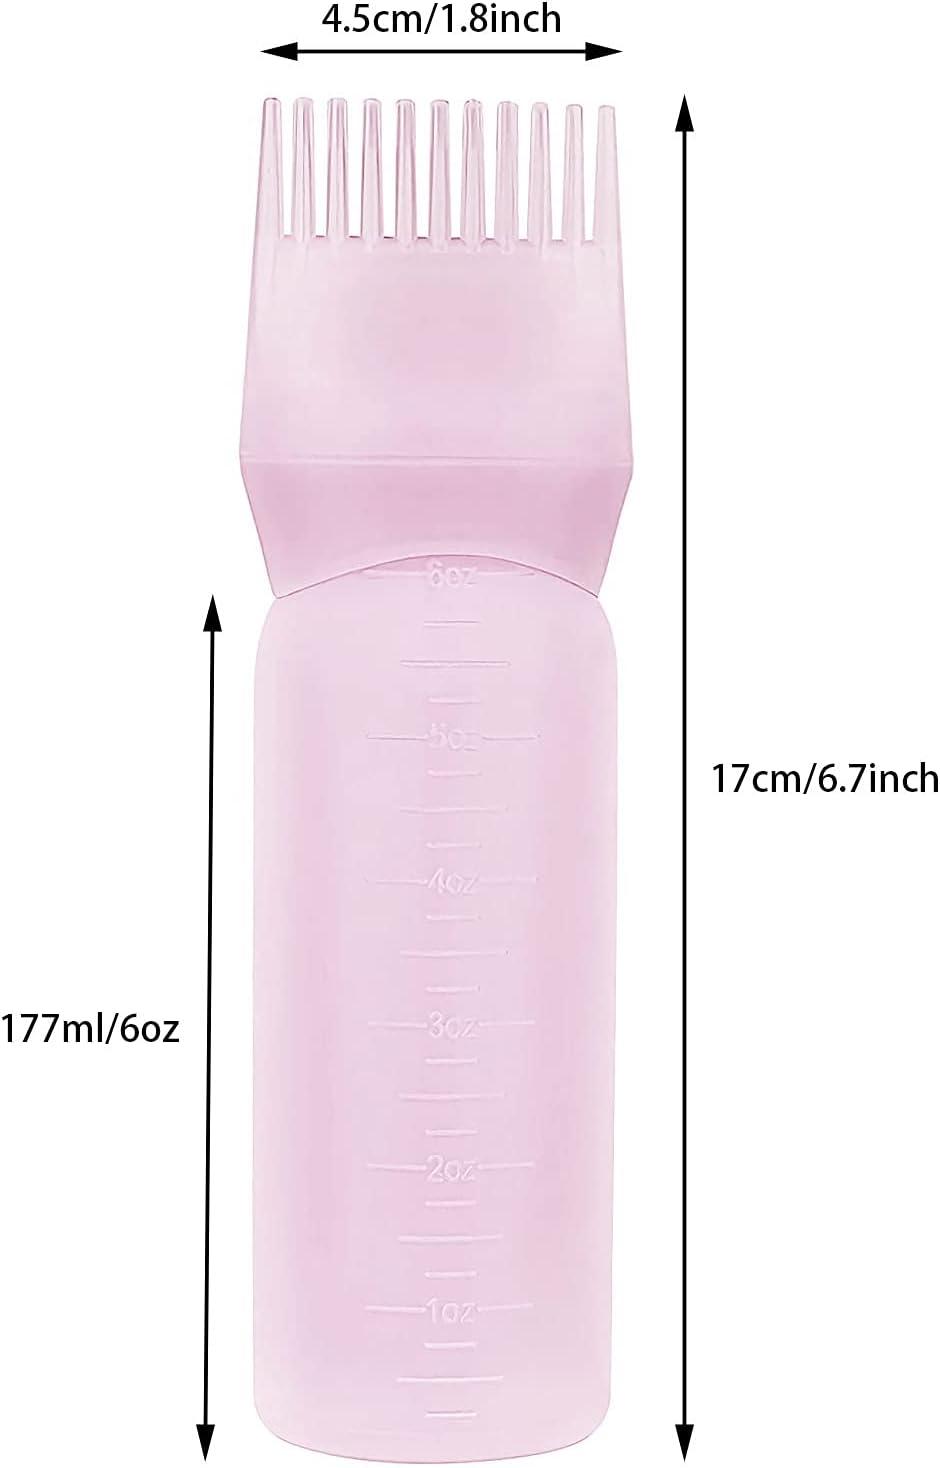  Yebeauty Root Comb Applicator Bottle, 2 Pack 6 Ounce